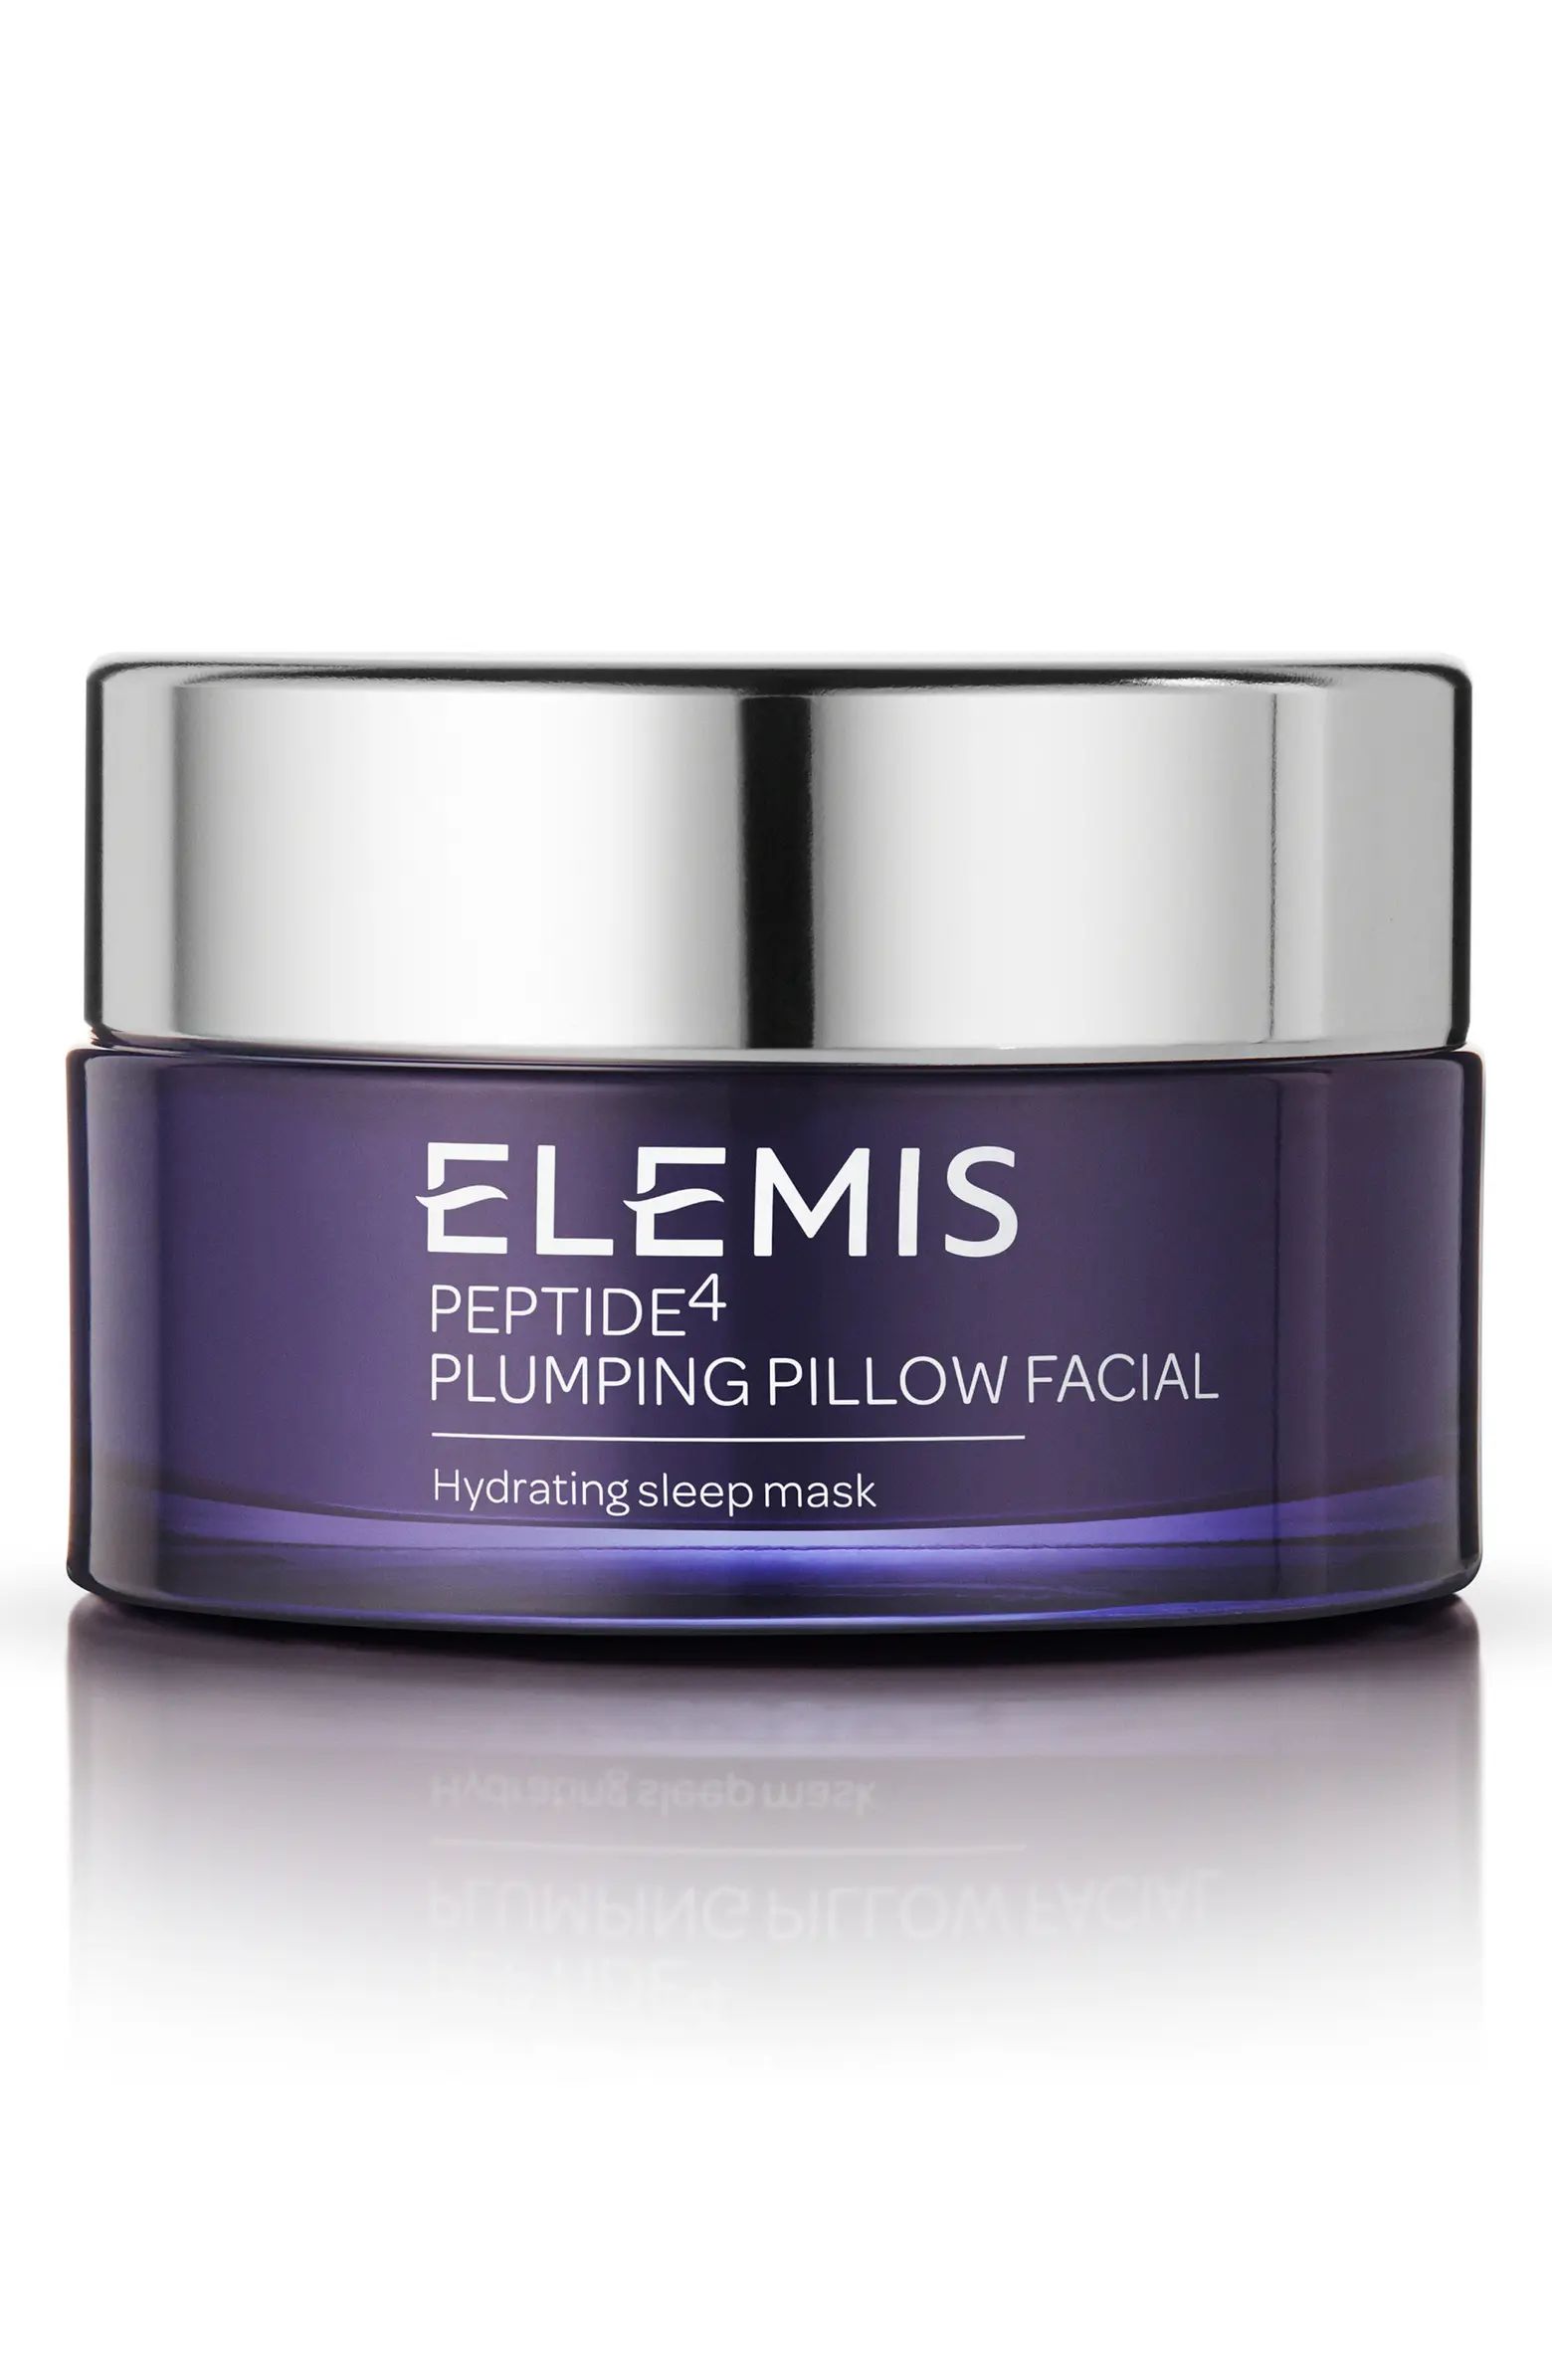 Peptide4 Plumping Pillow Facial Hydrating Sleep Mask | Nordstrom Rack